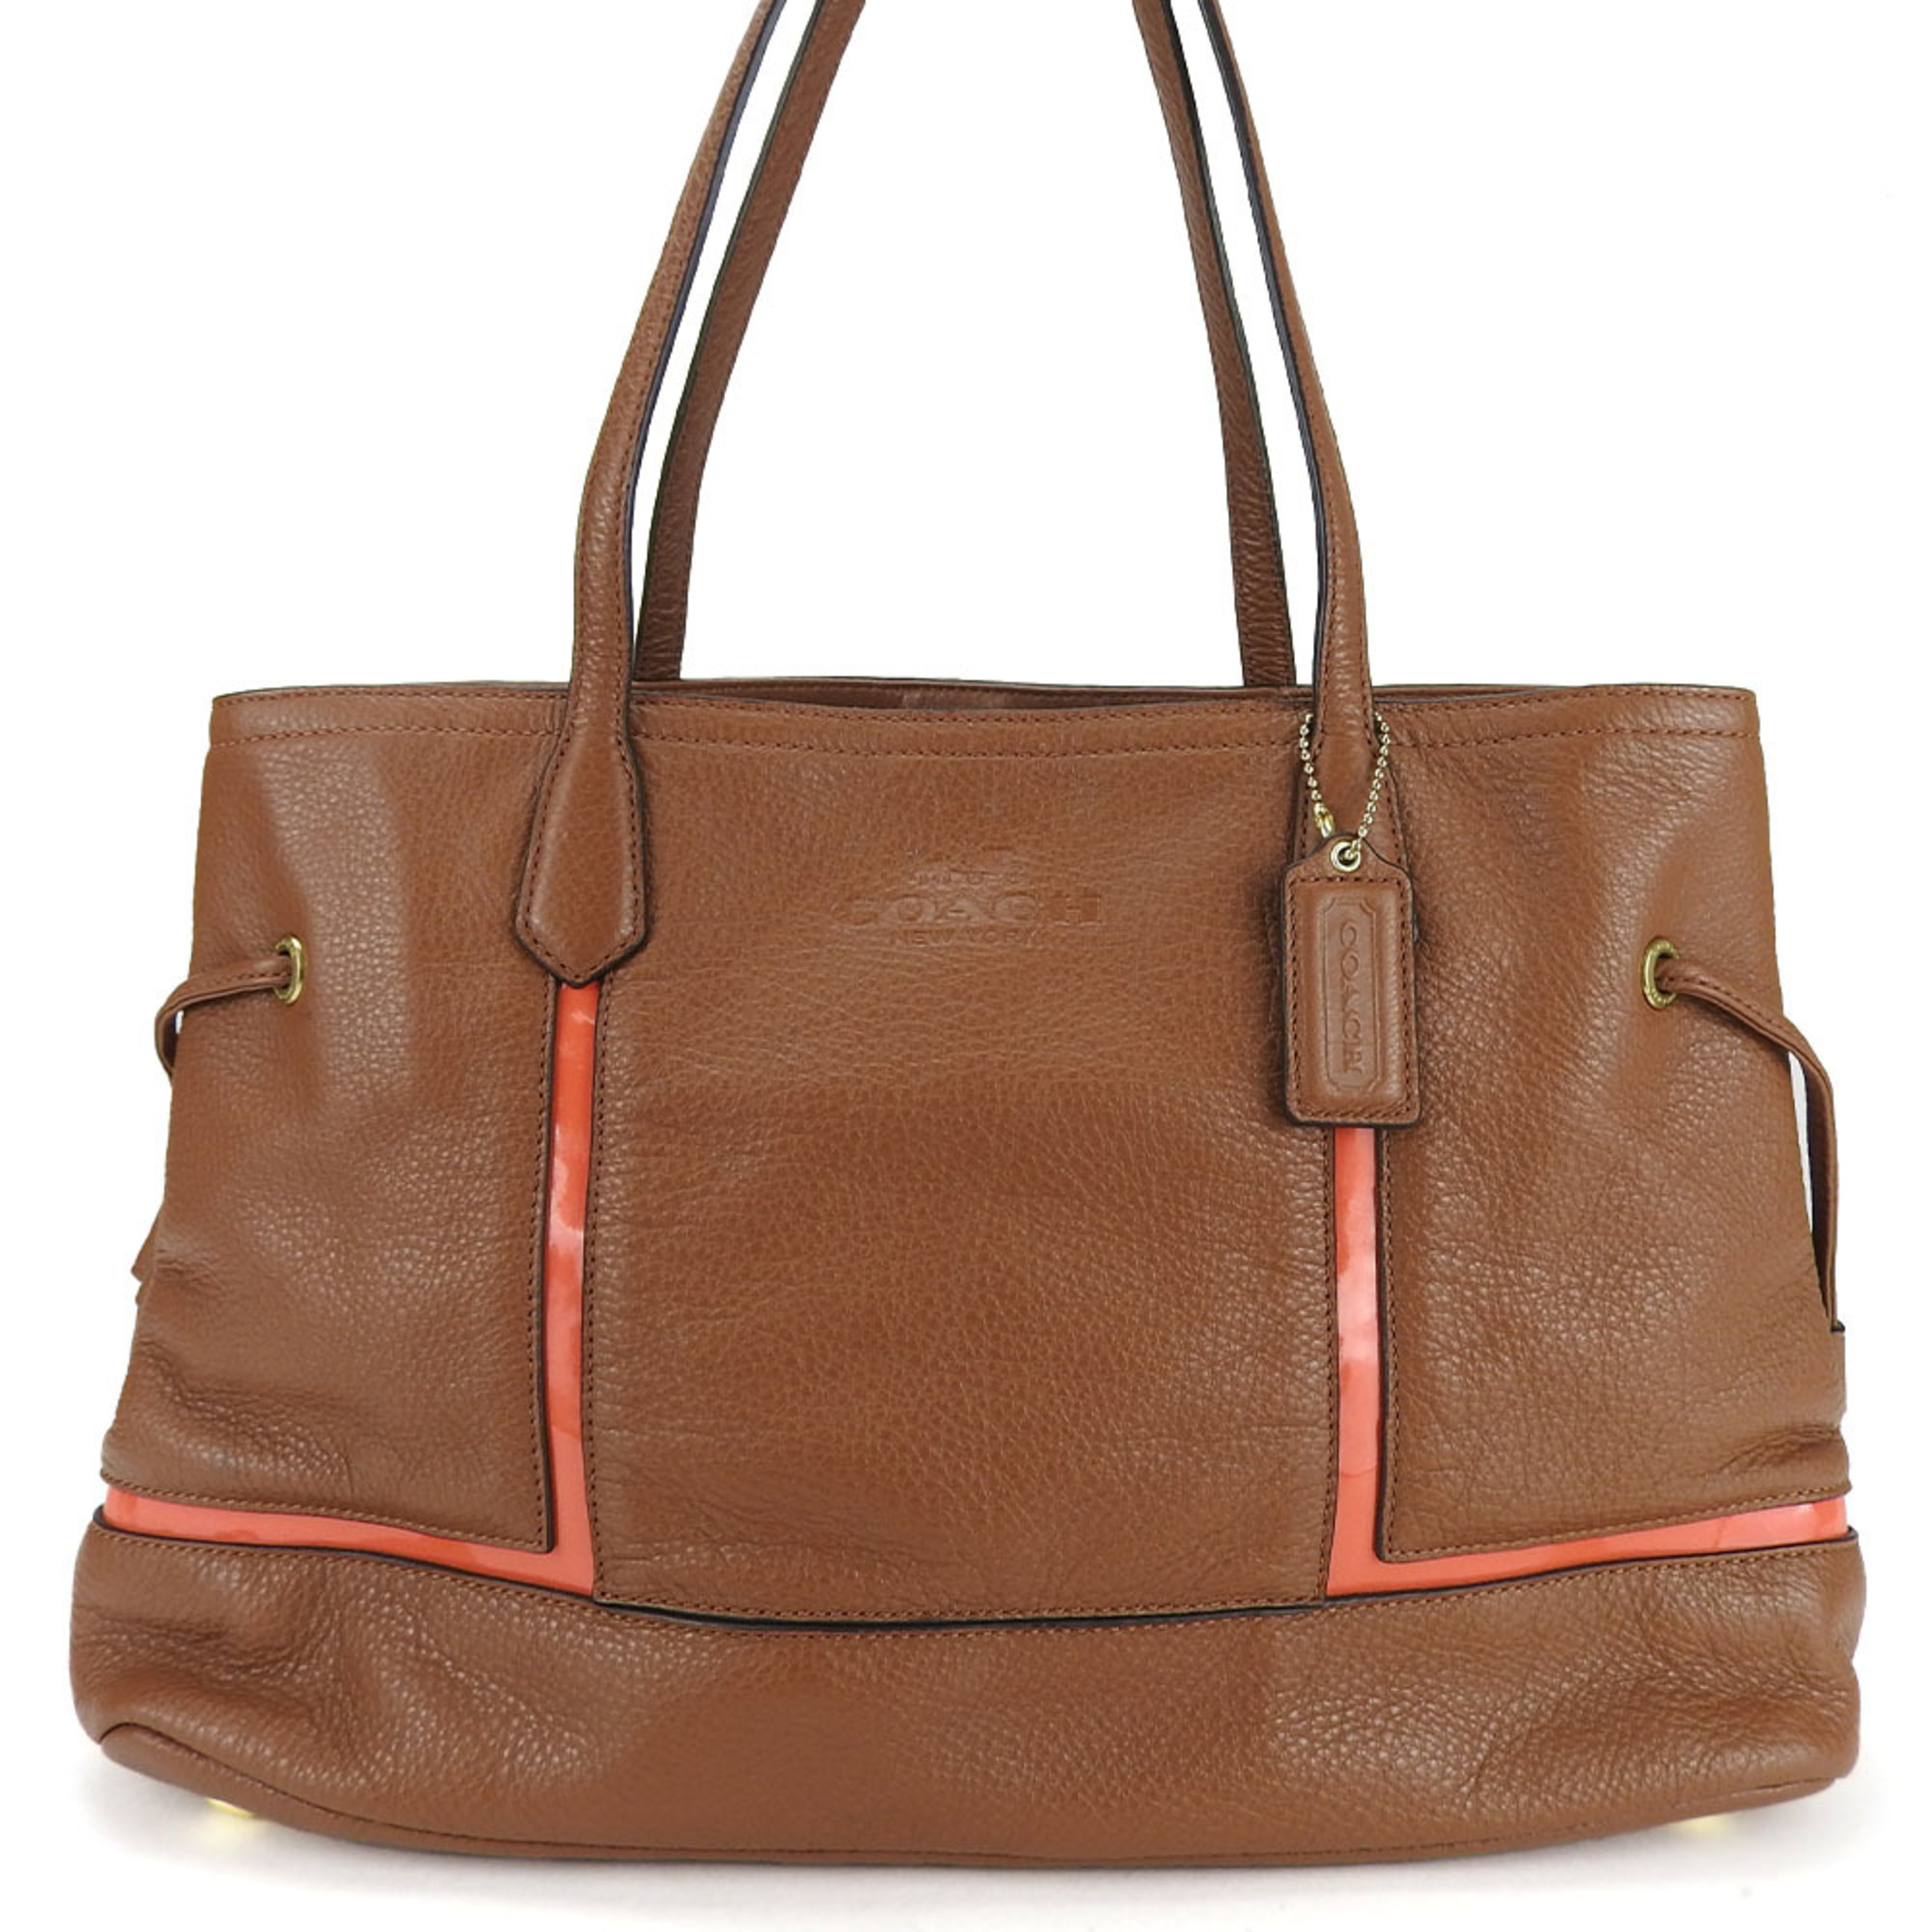 Coach Tote Bag F29891 Leather Patent Brown Red Shoulder Women's COACH